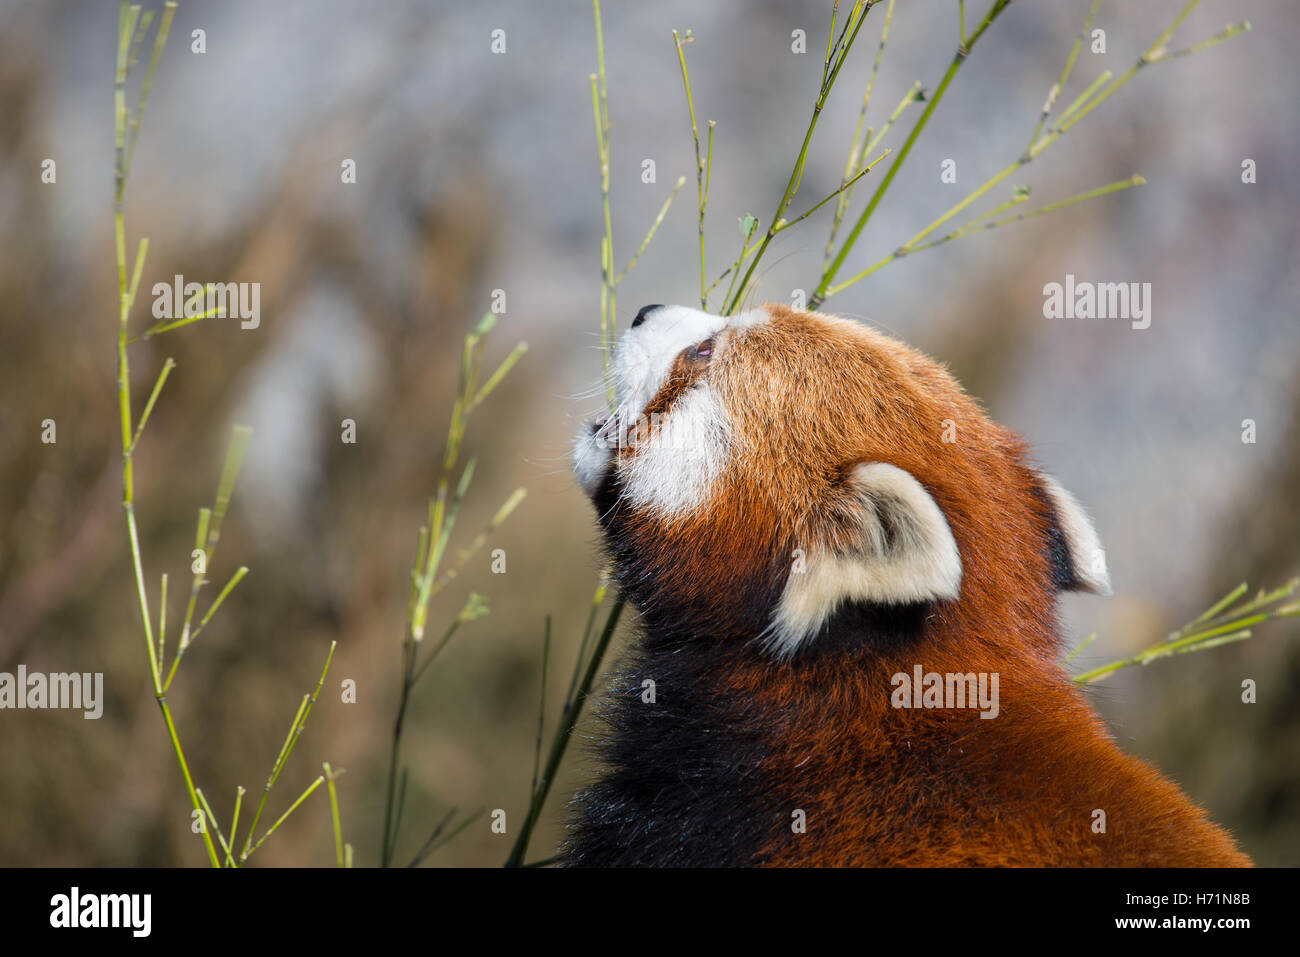 Red panda snacking on some leaves Stock Photo